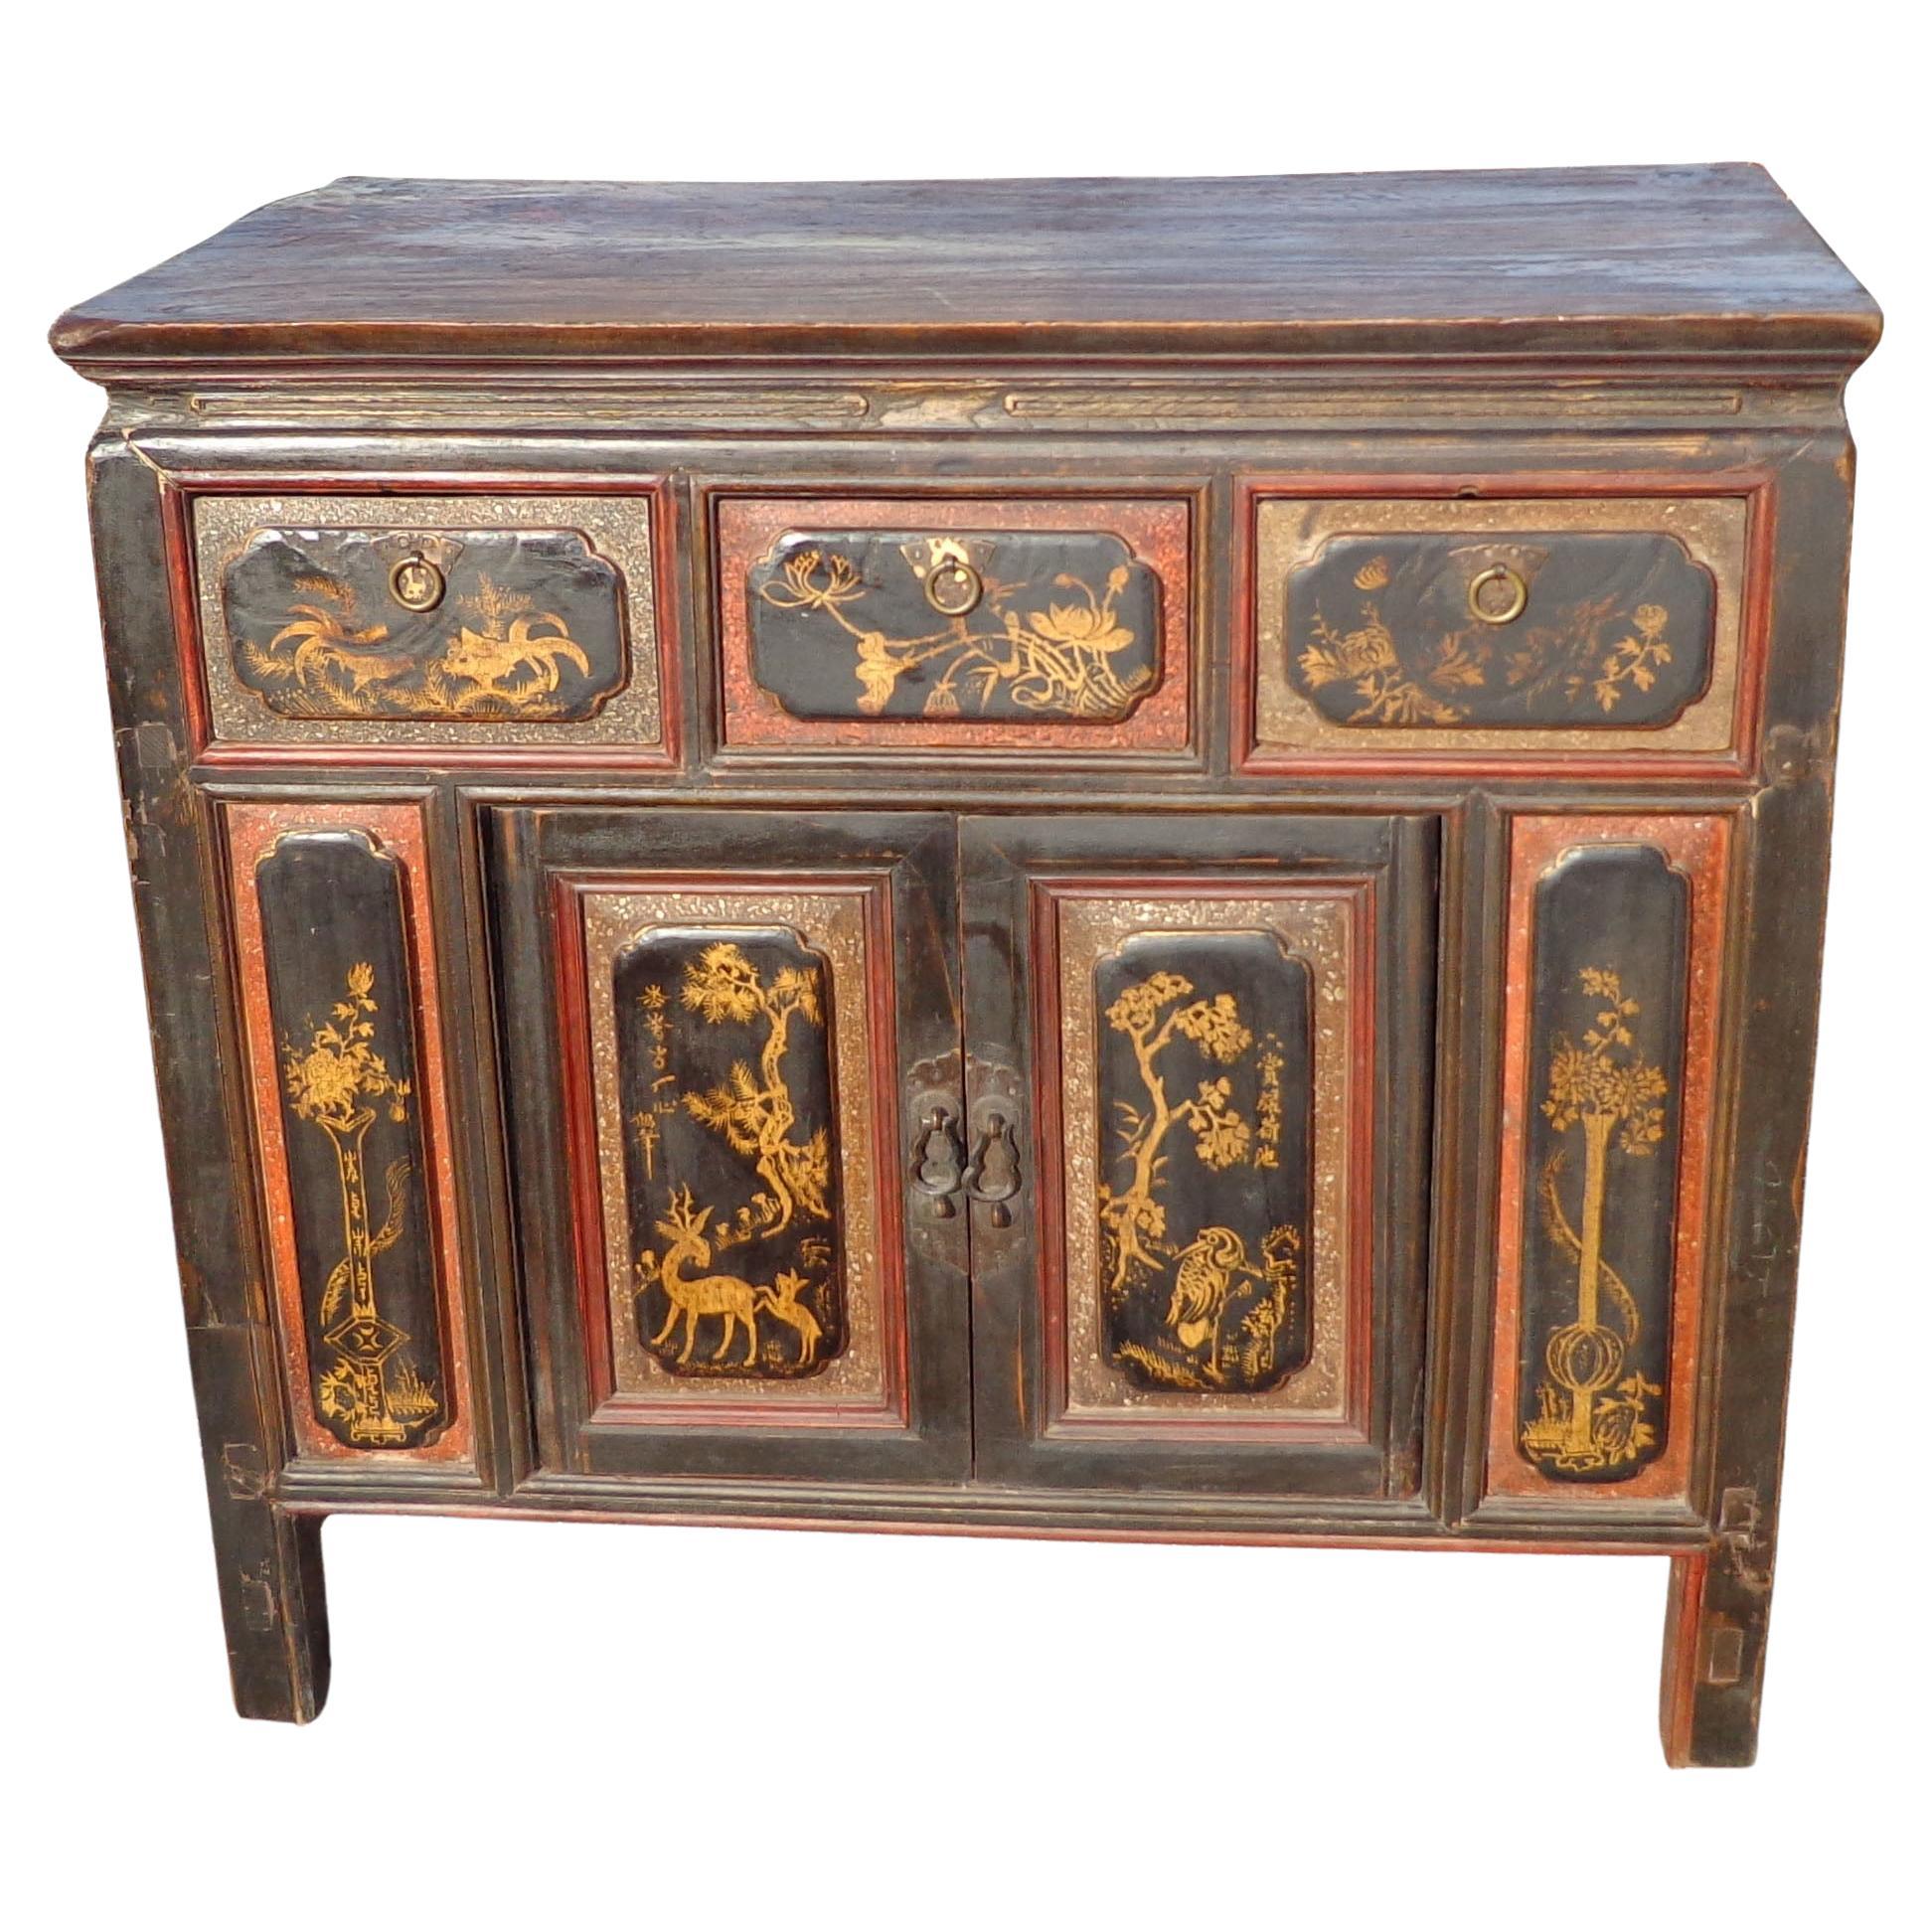 38.5″ Antique Qing Dynasty Paneled Chinese Cabinet